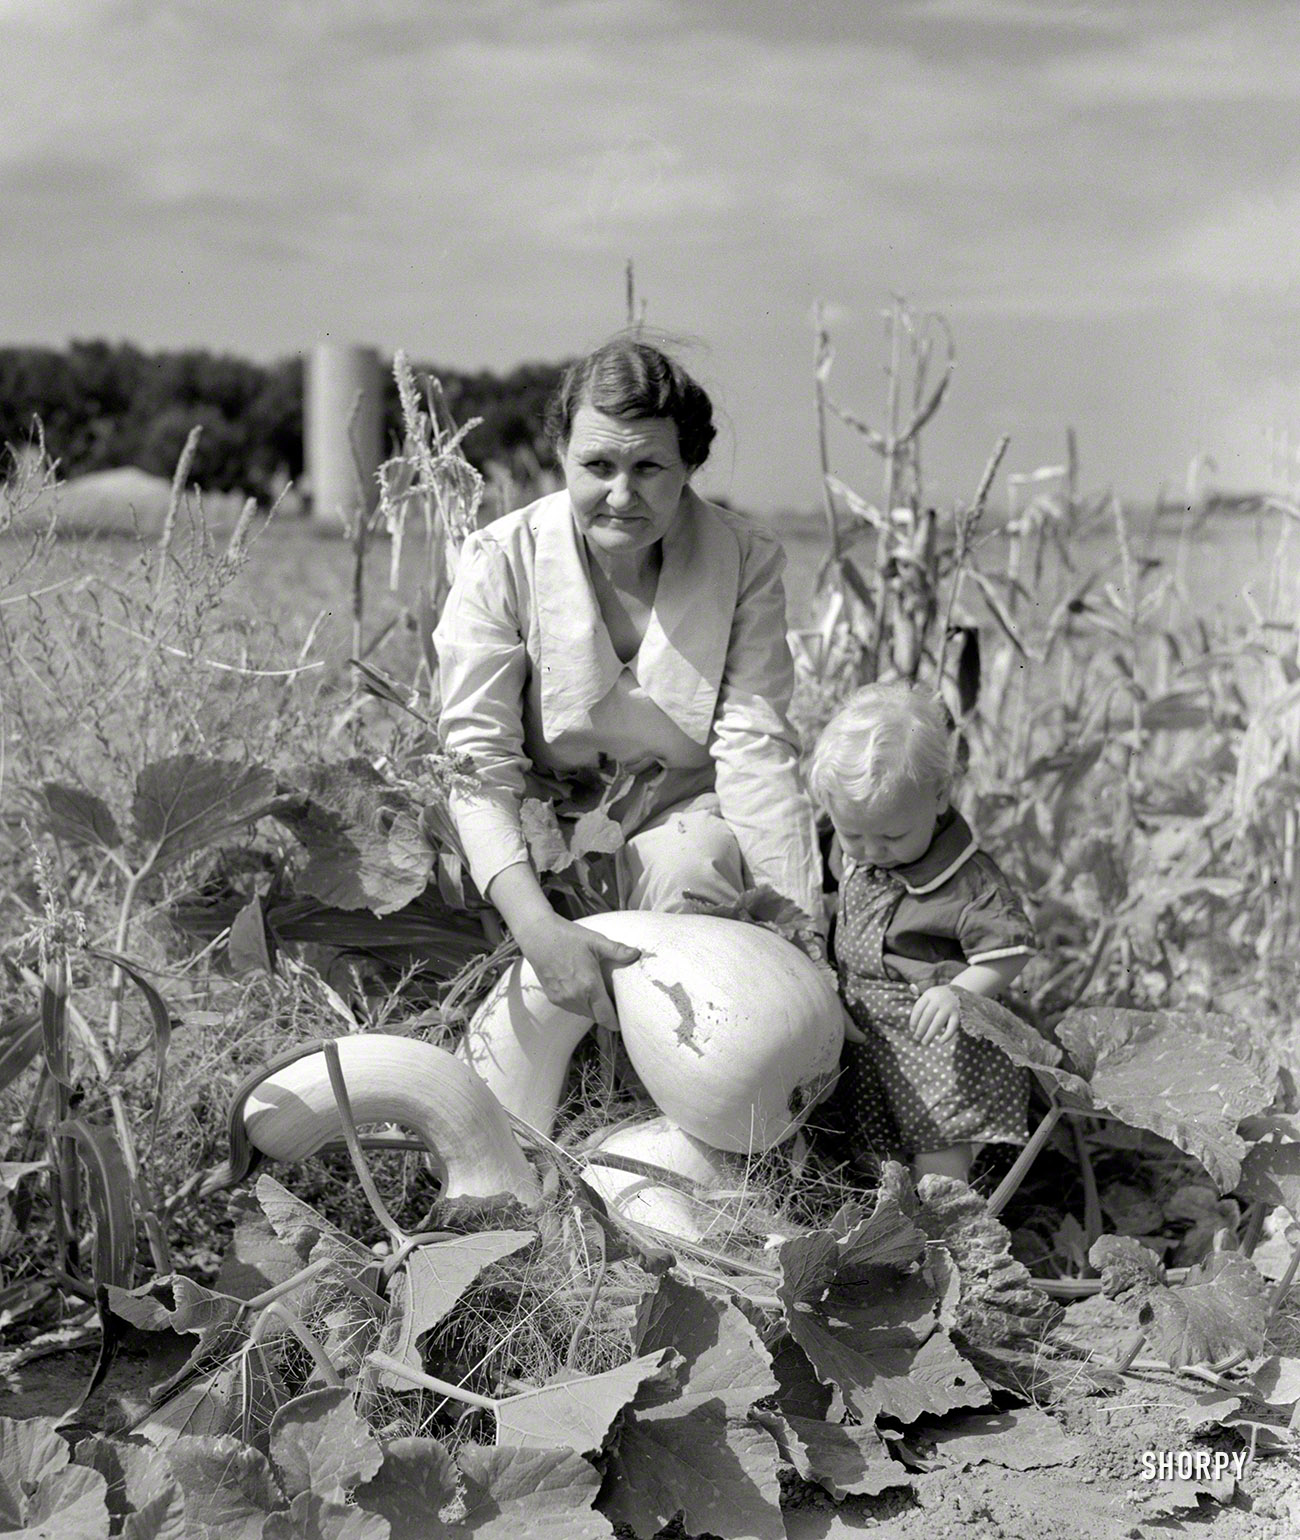 October 1939. "Mrs. Calvin Brown, wife of Farm Security Administration borrower, with grandson in garden near Eaton, Colorado." It may be time to revise the cabbage-leaf theory. Photo by Arthur Rothstein. View full size.